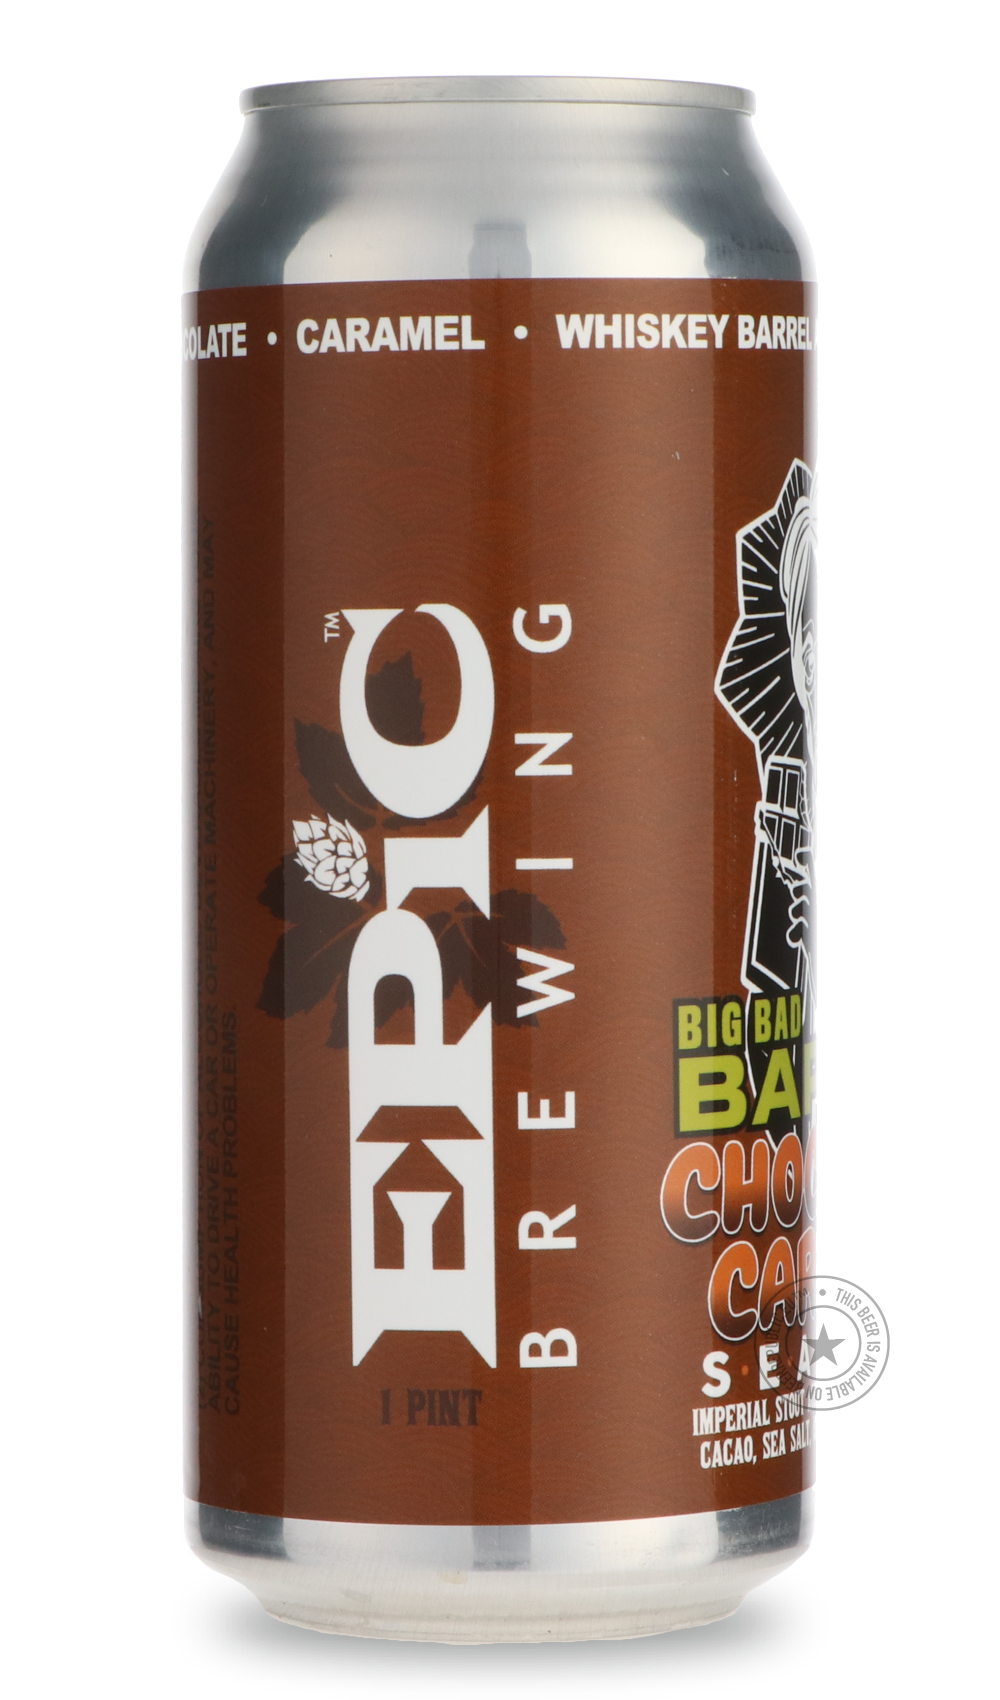 -Epic- Big Bad Baptist Chocolate Caramel Sea Salt-Stout & Porter- Only @ Beer Republic - The best online beer store for American & Canadian craft beer - Buy beer online from the USA and Canada - Bier online kopen - Amerikaans bier kopen - Craft beer store - Craft beer kopen - Amerikanisch bier kaufen - Bier online kaufen - Acheter biere online - IPA - Stout - Porter - New England IPA - Hazy IPA - Imperial Stout - Barrel Aged - Barrel Aged Imperial Stout - Brown - Dark beer - Blond - Blonde - Pilsner - Lager